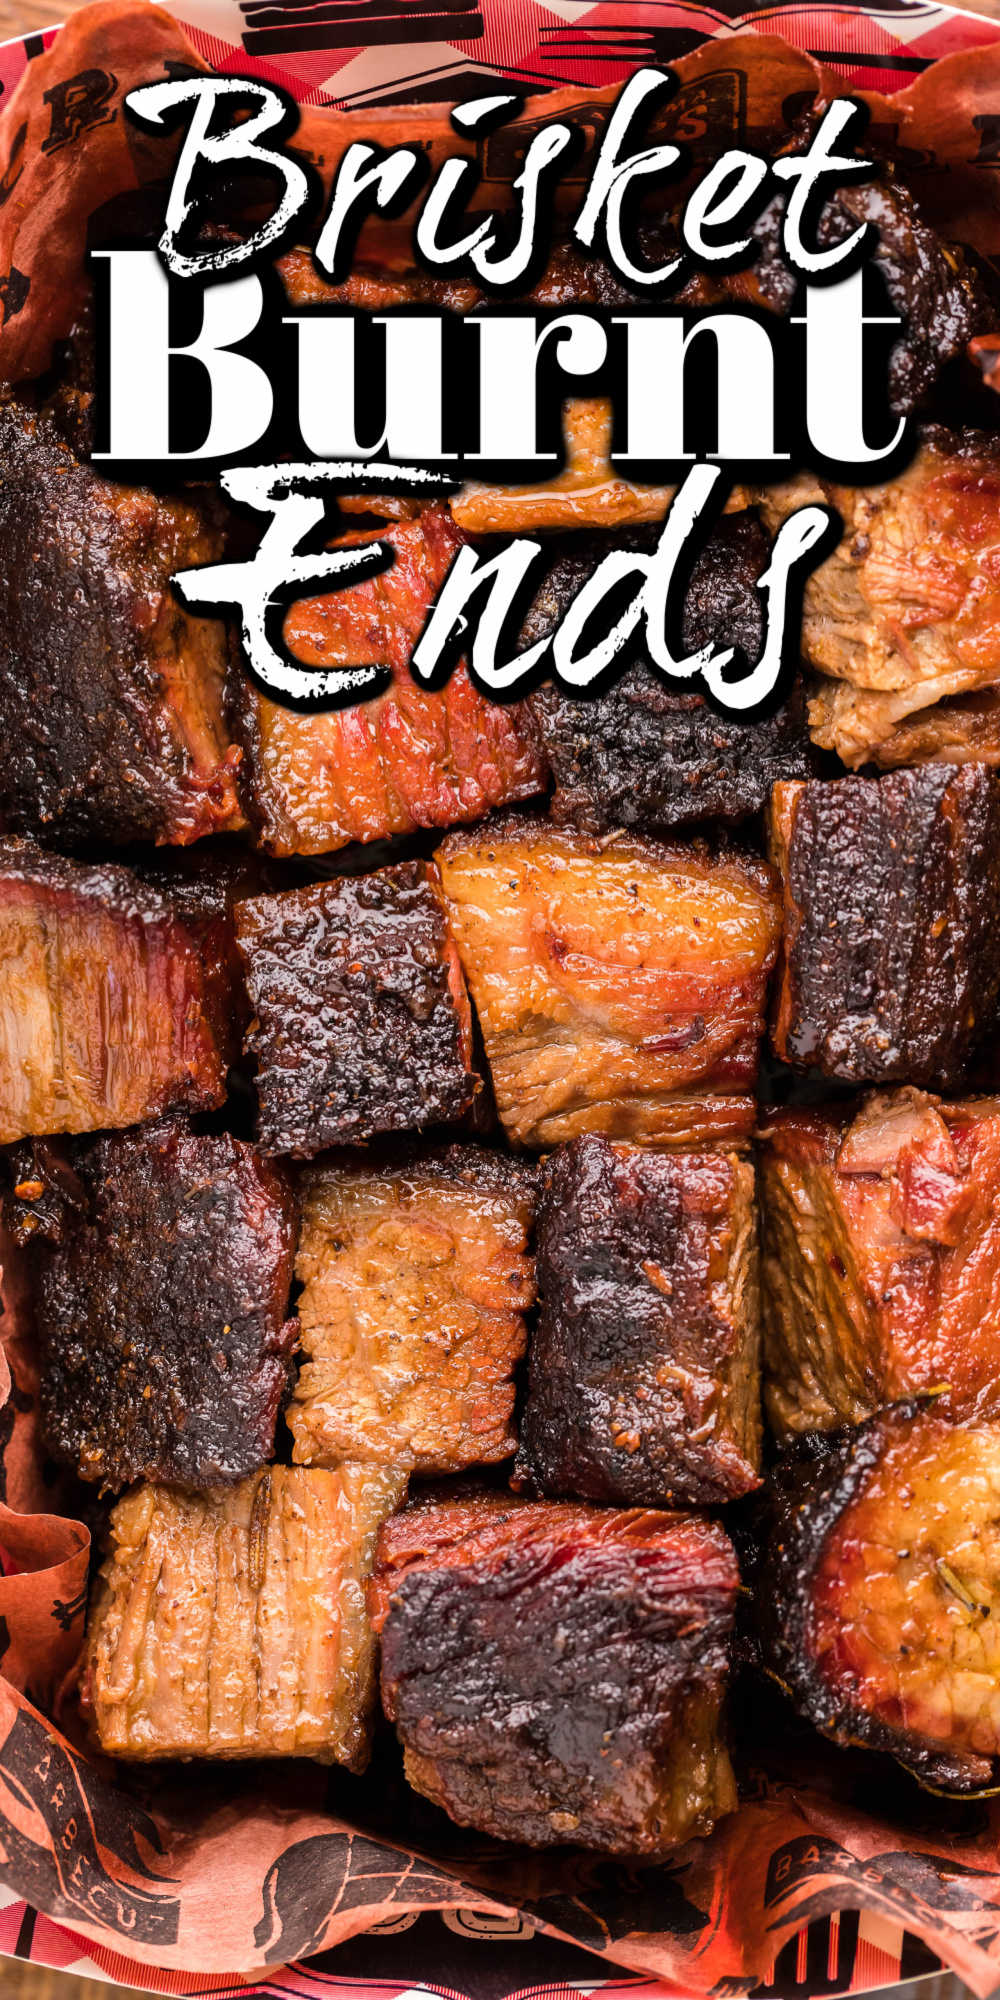 These brunt ends are so tender, juicy and flavorful! You, your family, and friends are simply going to love them